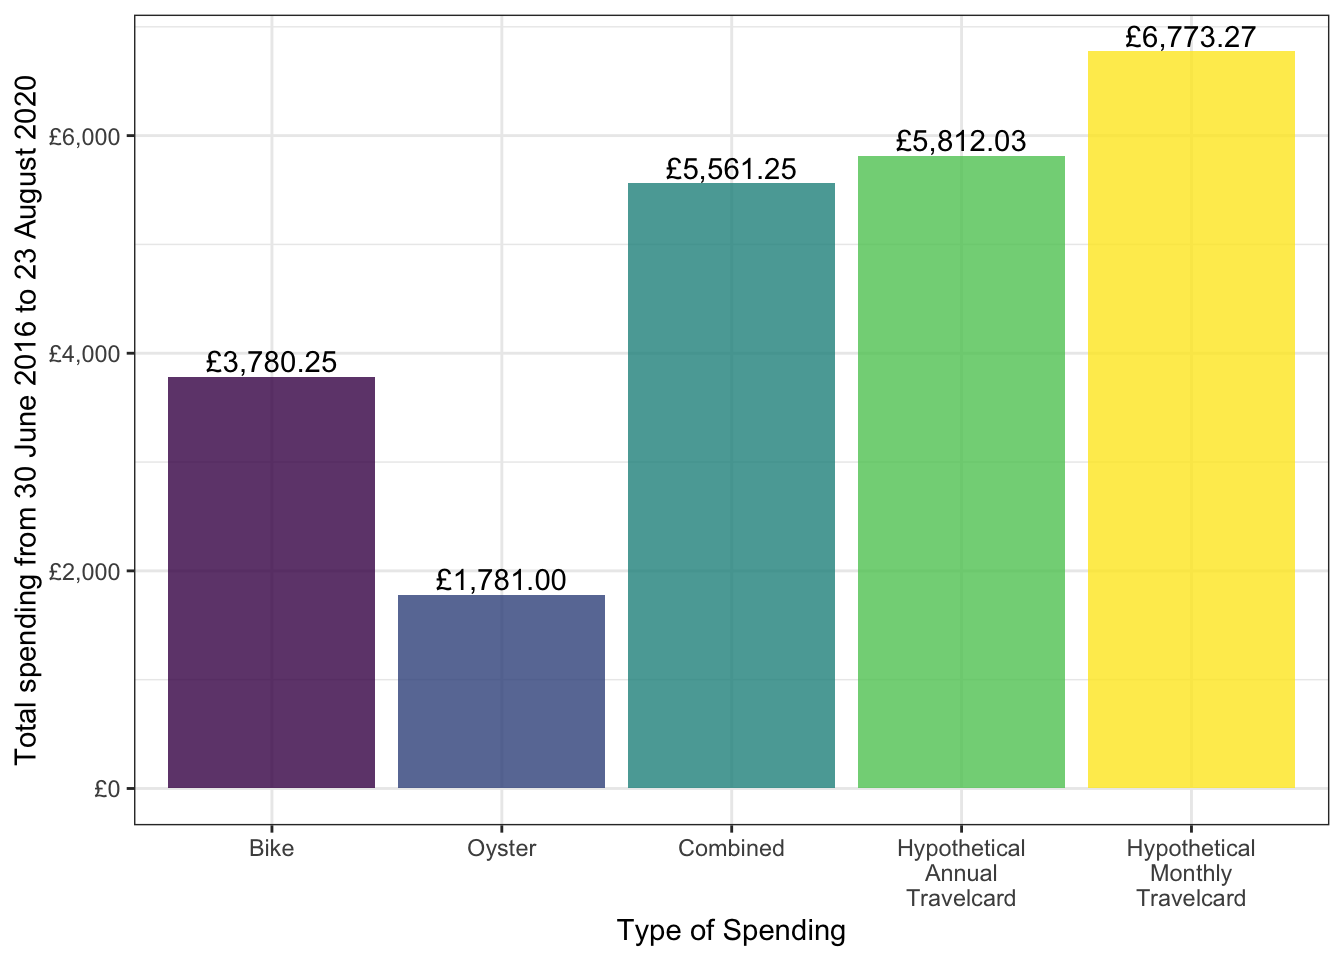 Total and combined spending